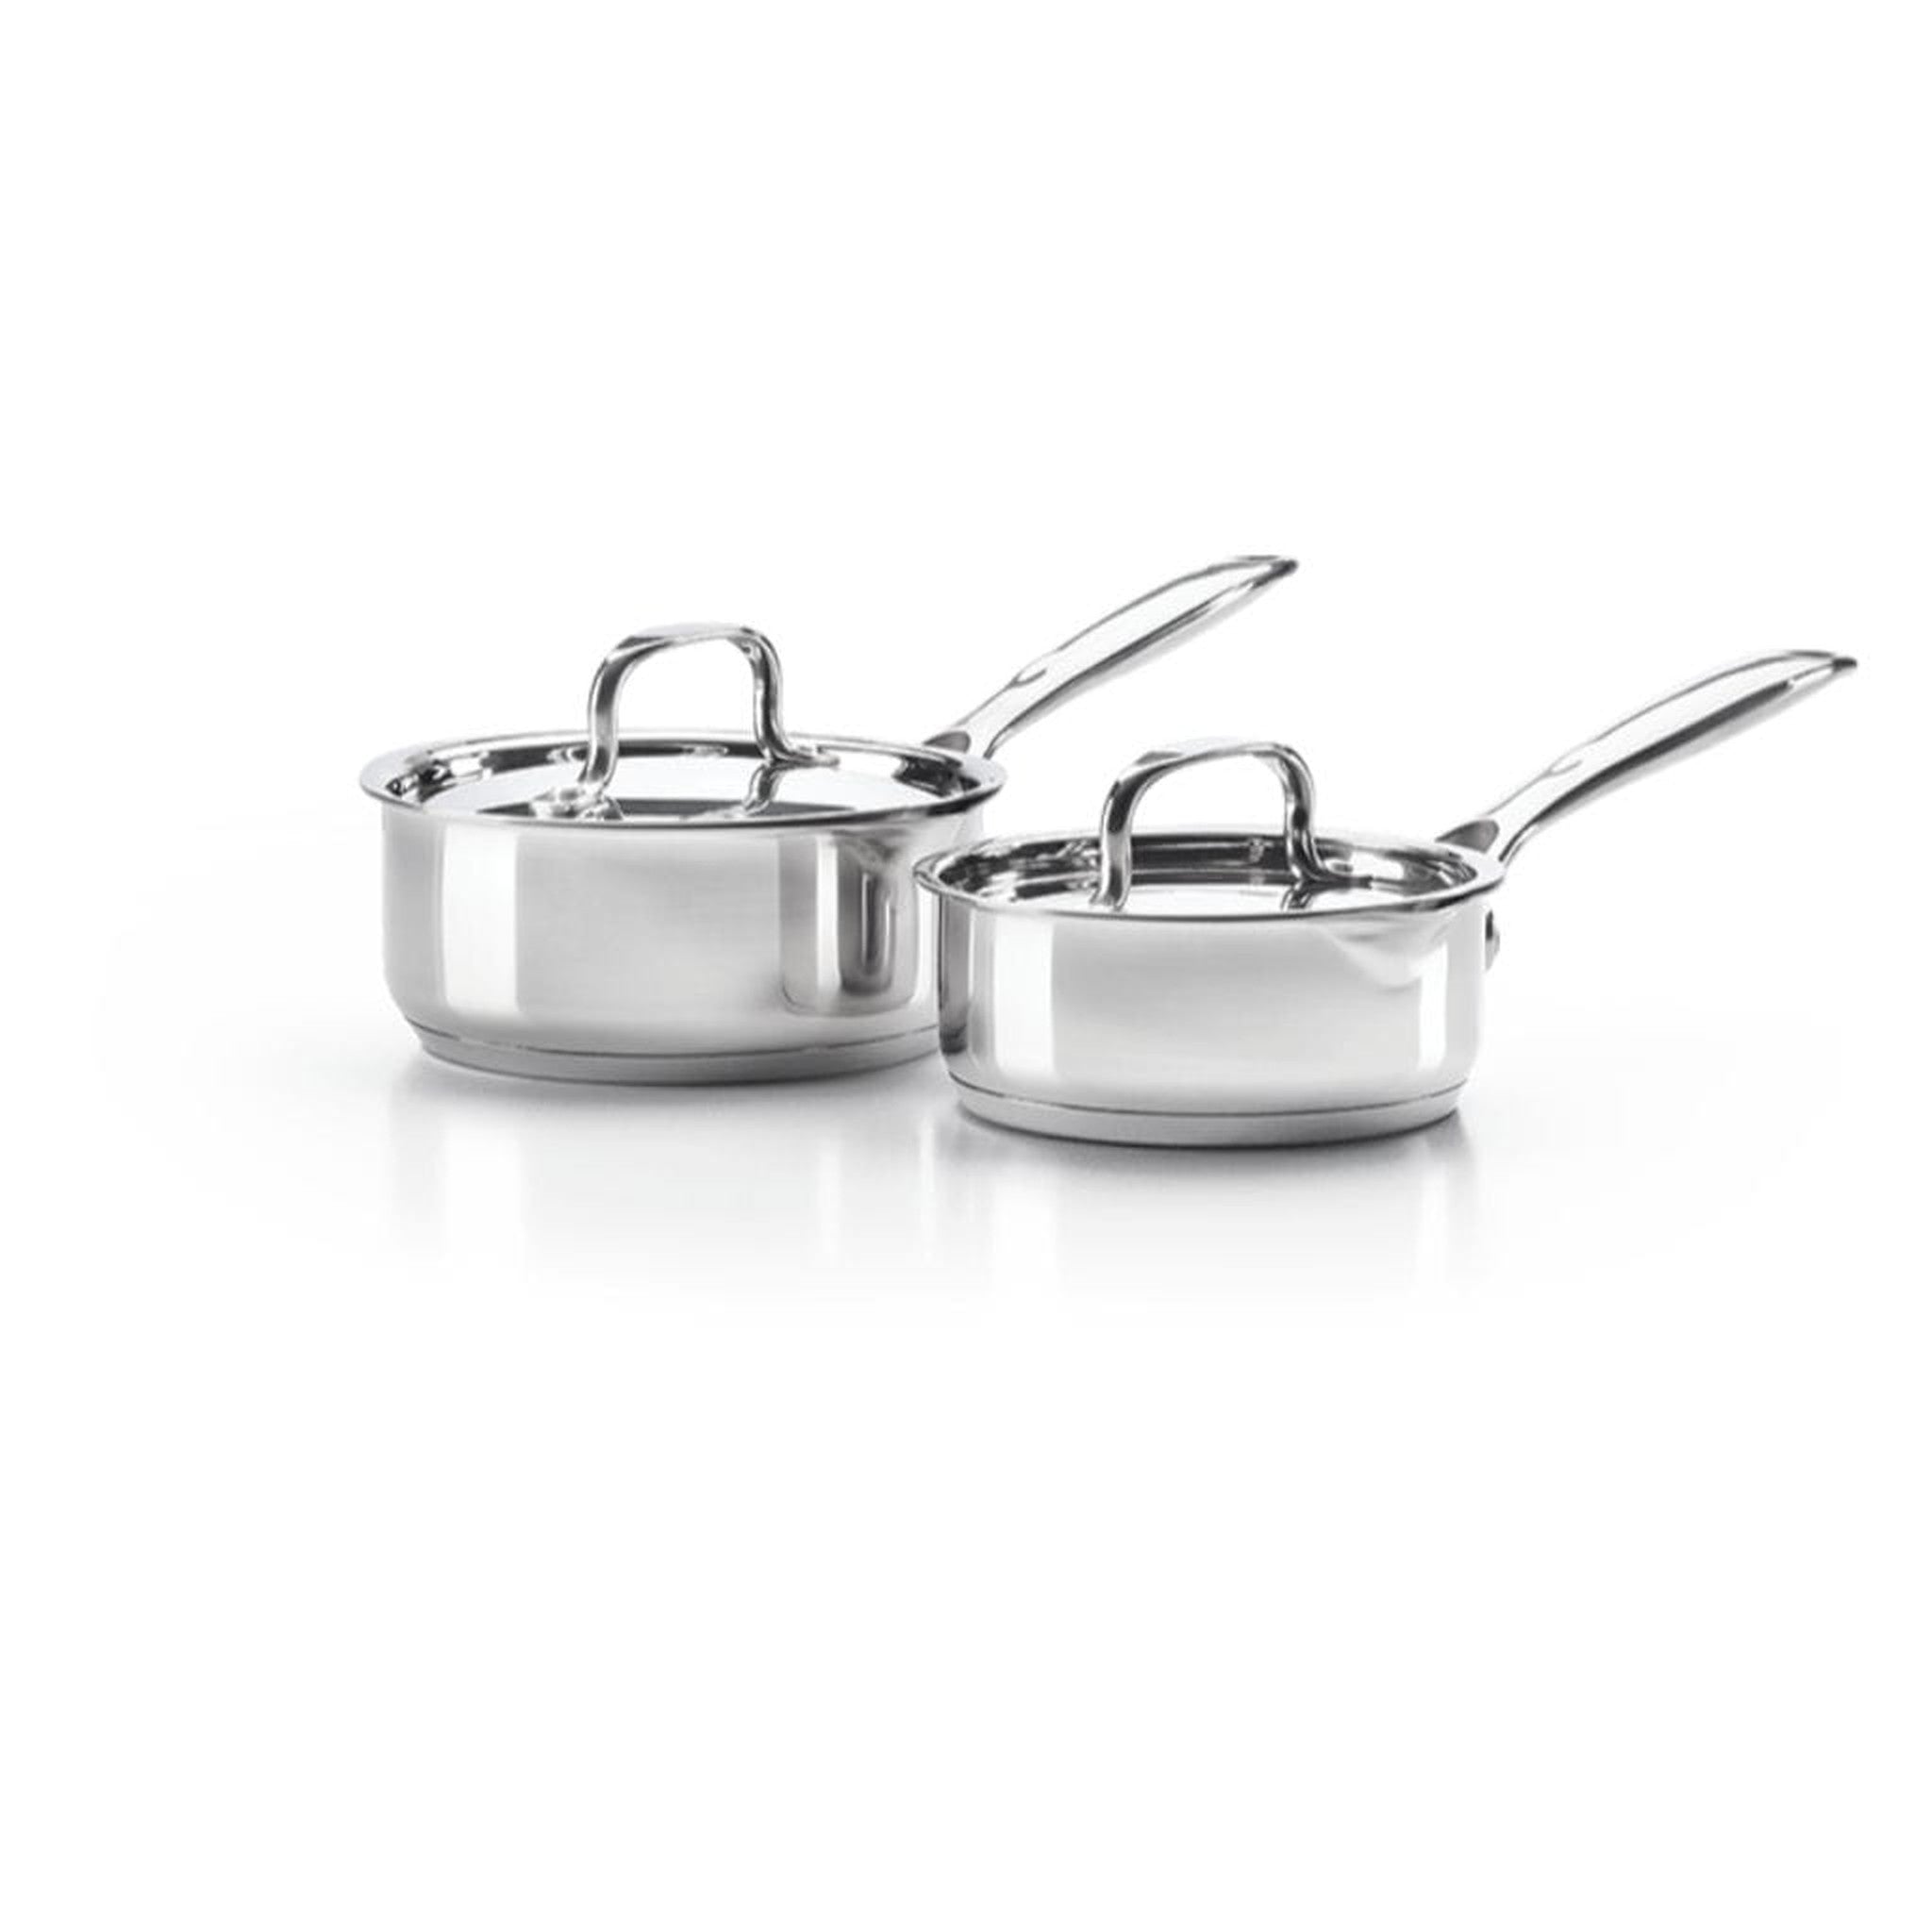 70028 by Napoleon BBQ - Stainless Steel Wok